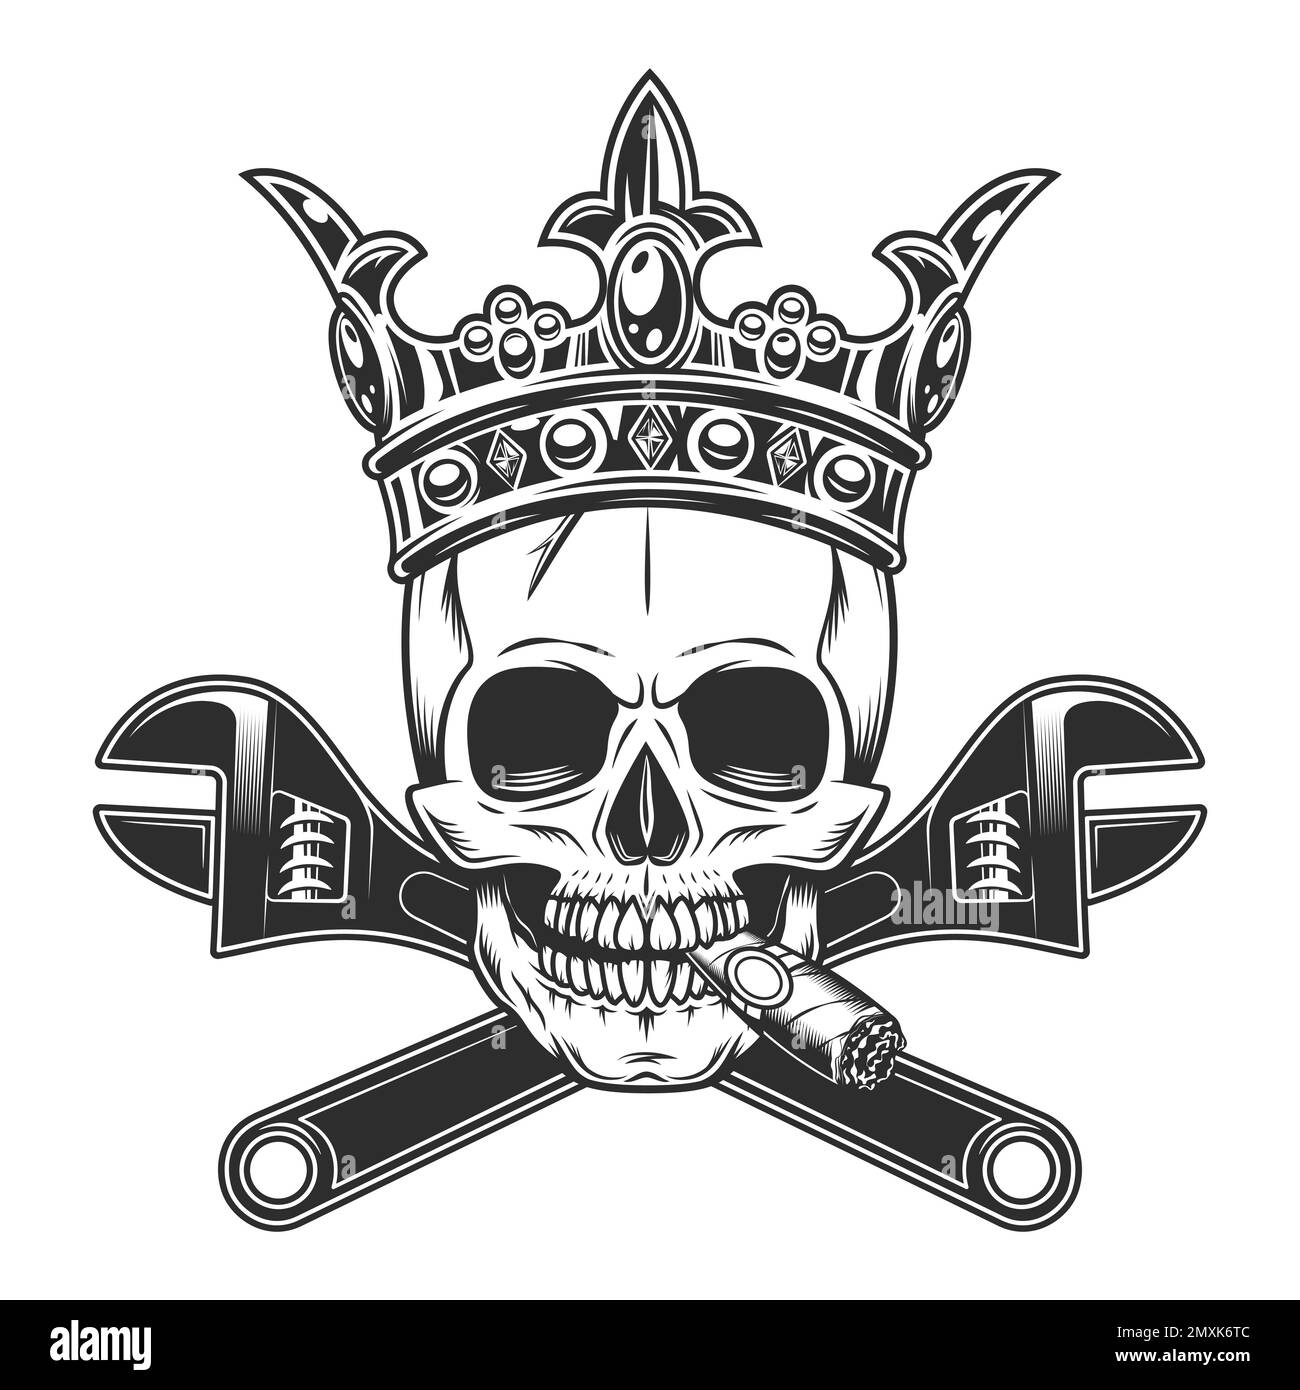 Skull smoking cigar or cigarette smoke with wrench tools and crown king in monochrome illustration style vector icon. Construction spanner plumbing ke Stock Vector